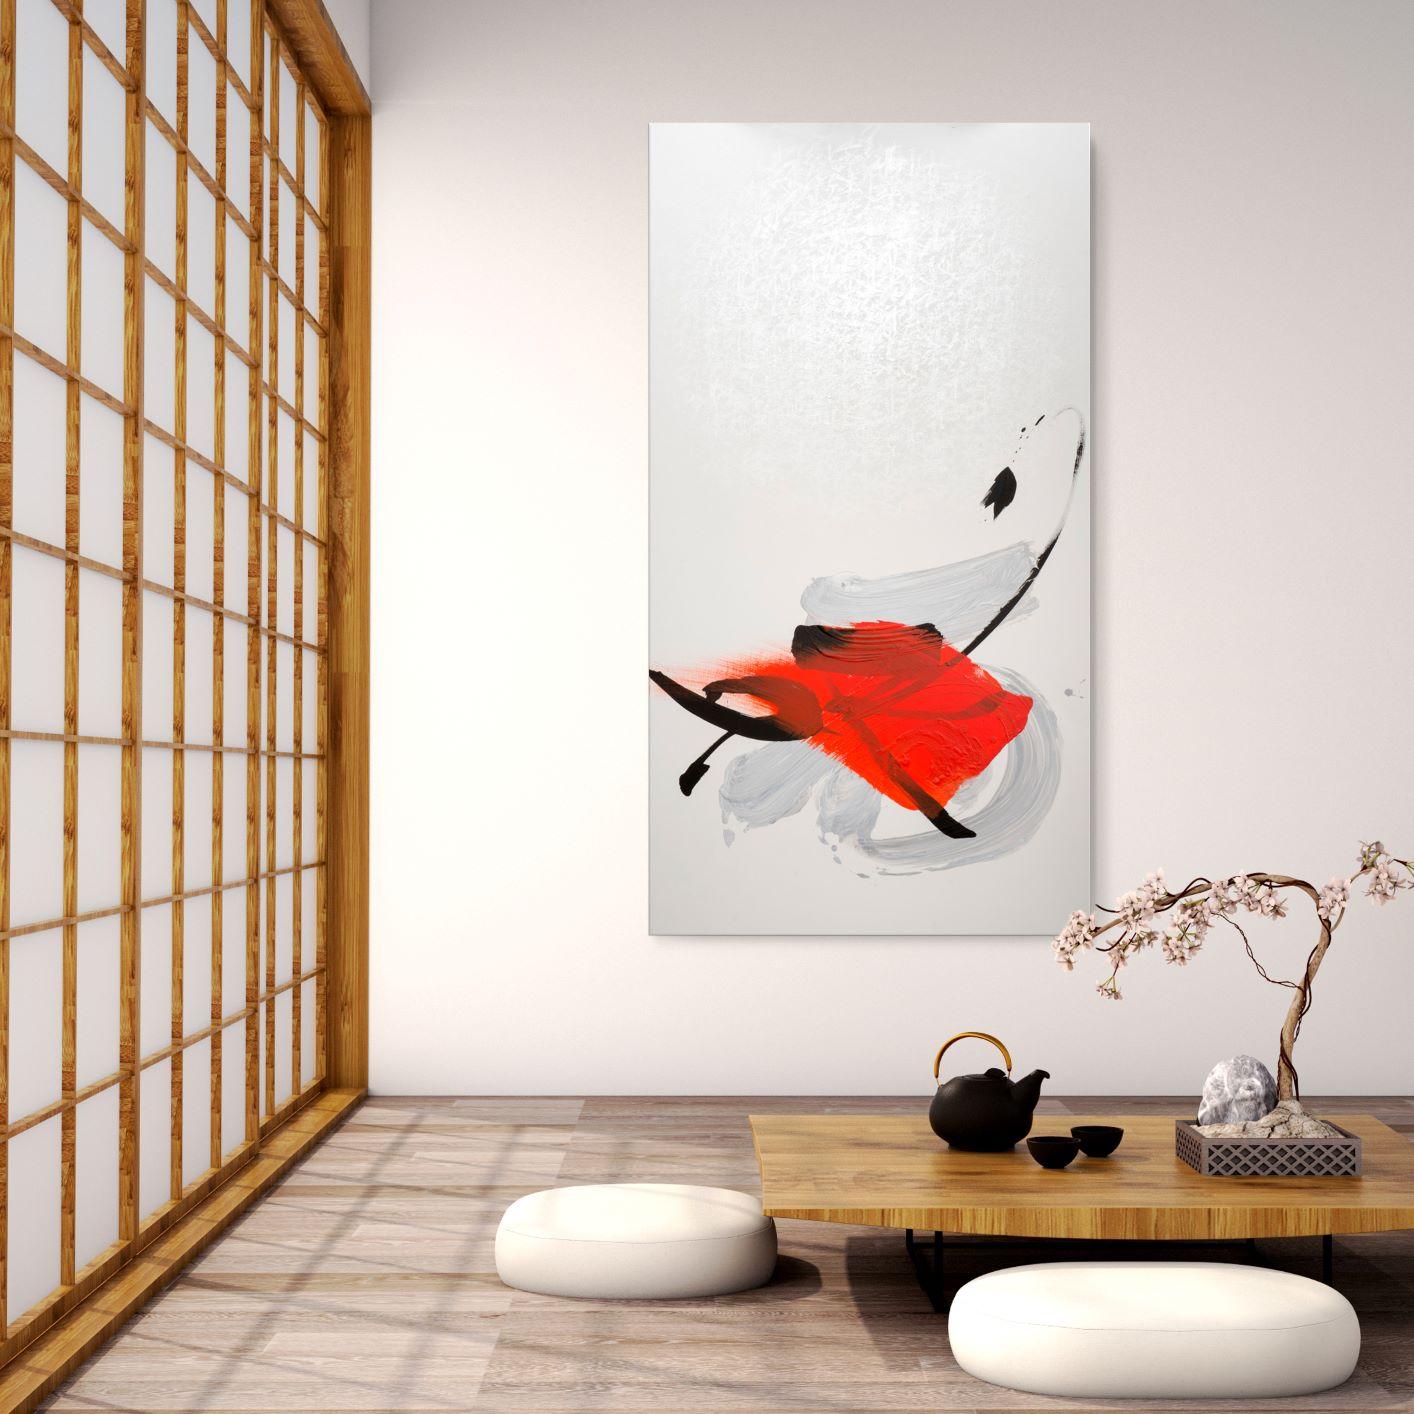 TN 566 by Hachiro Kanno - Calligraphy-based abstract painting, red, white, black For Sale 1